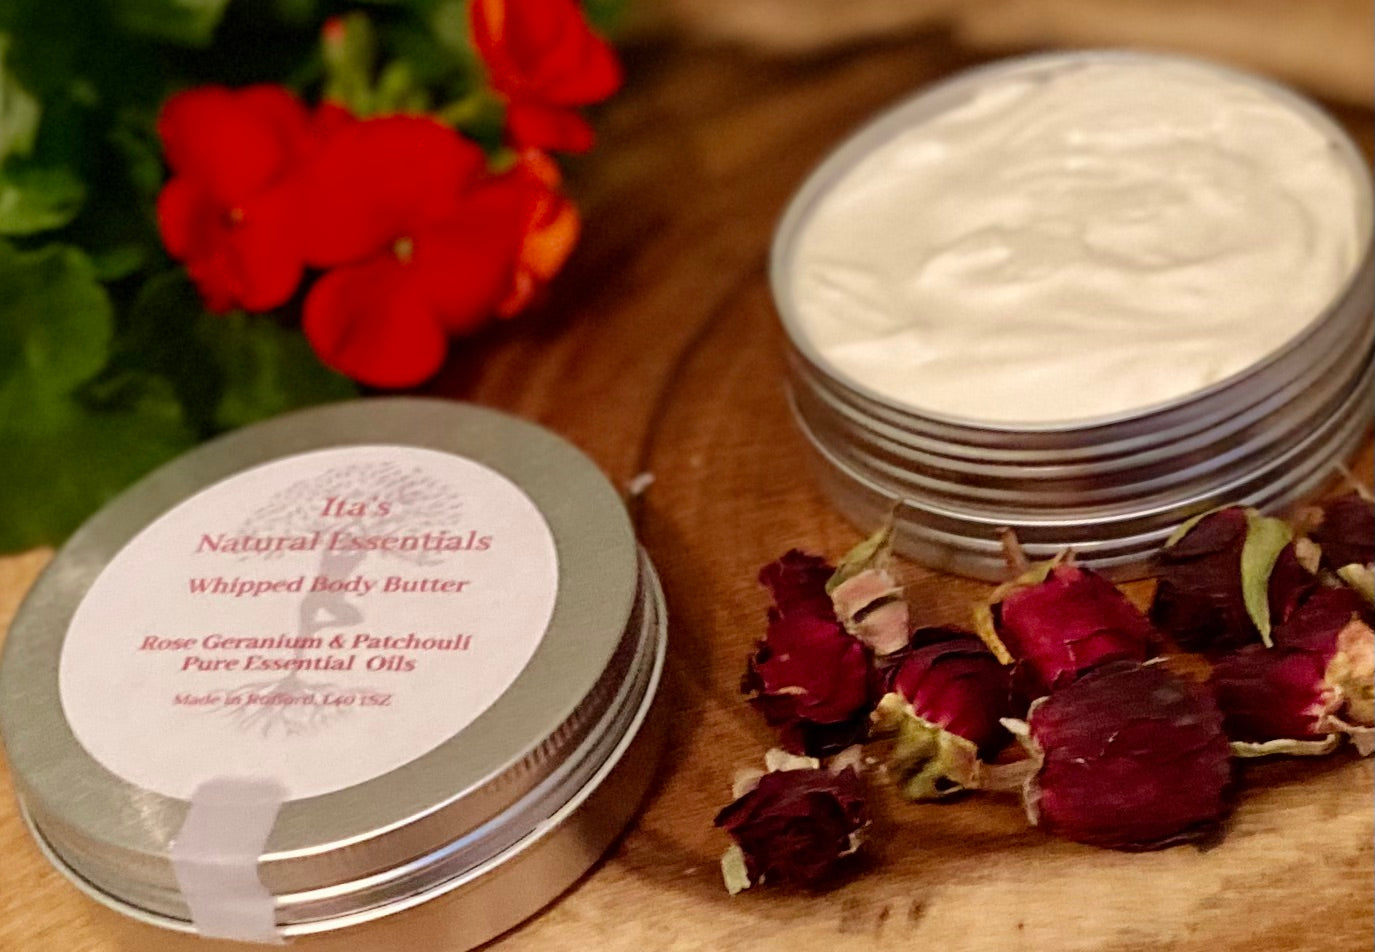 Whipped Shea Body Butters blended with Essentials oils